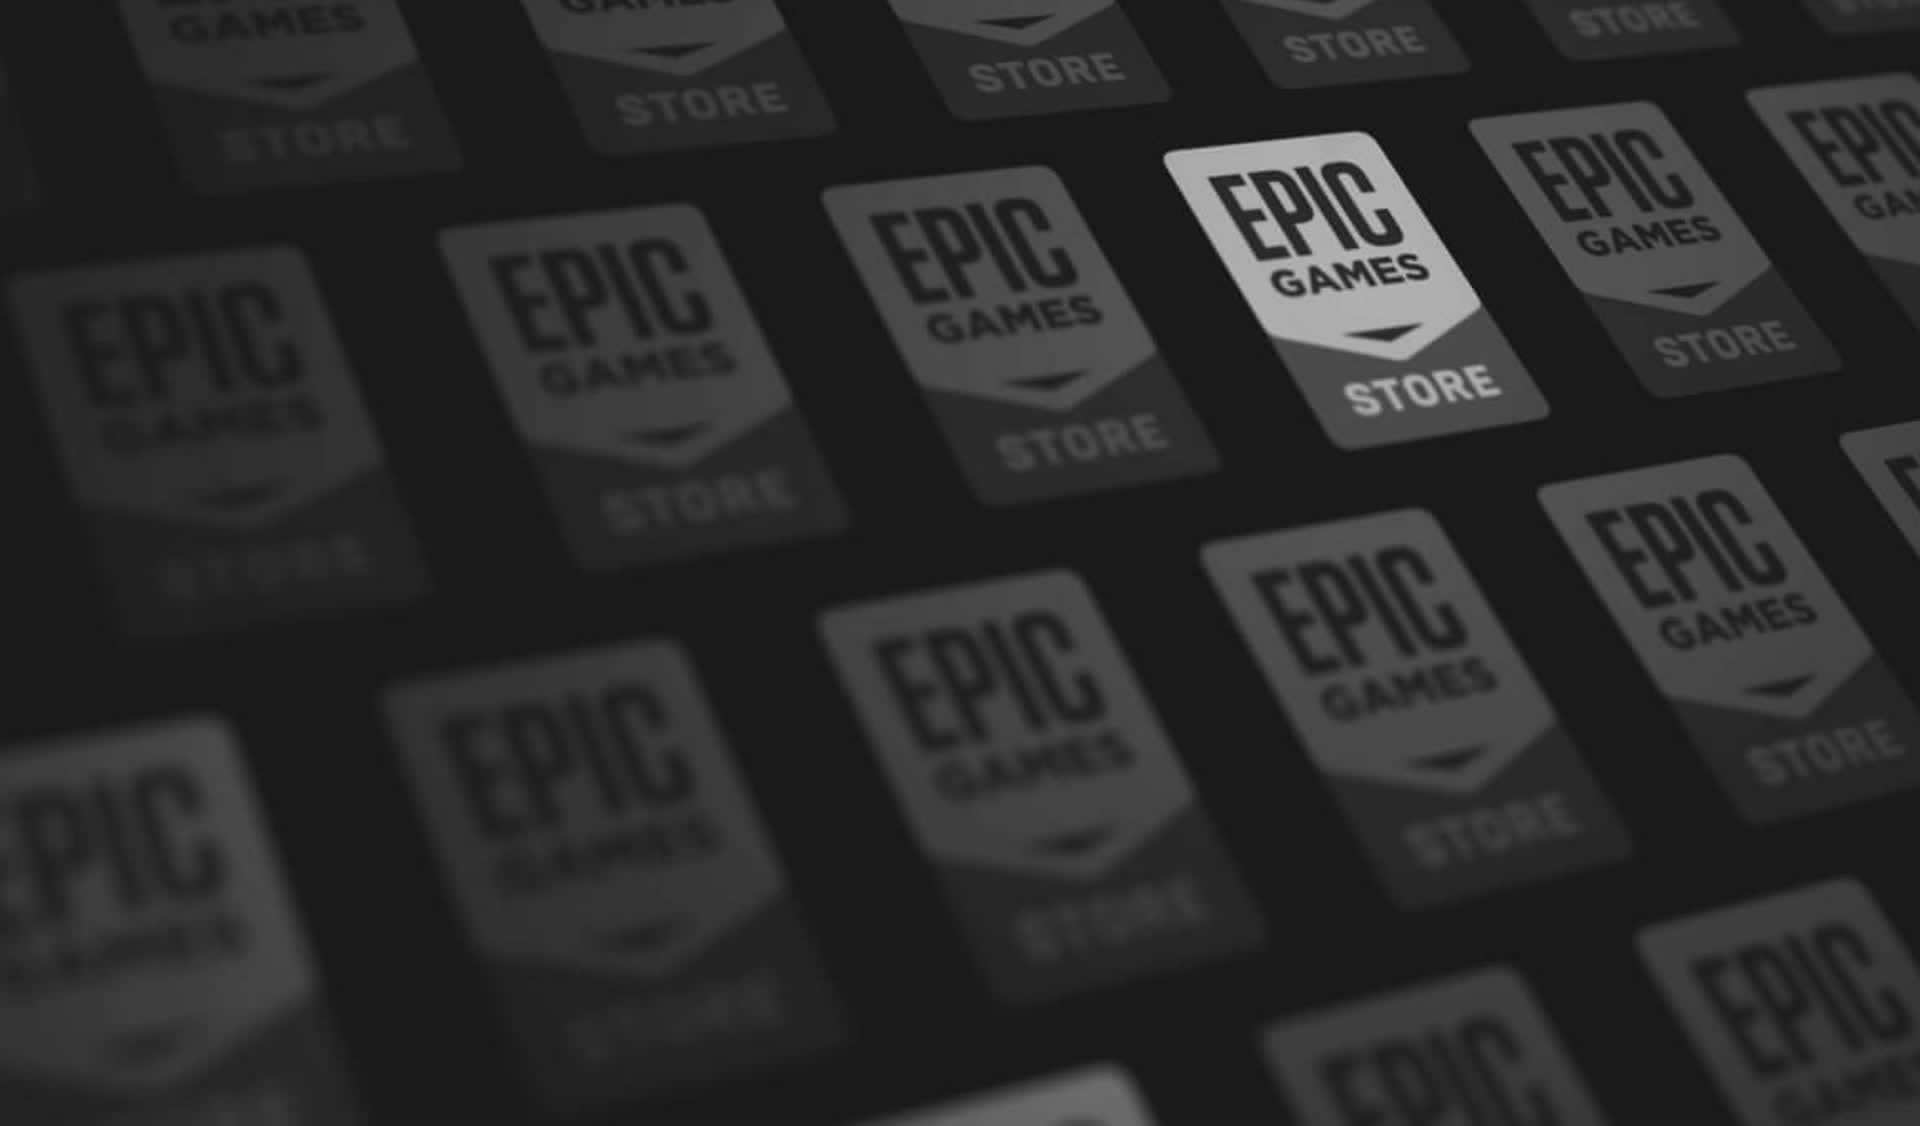 Epic Store gained 7 million new users during the GTA V giveaway